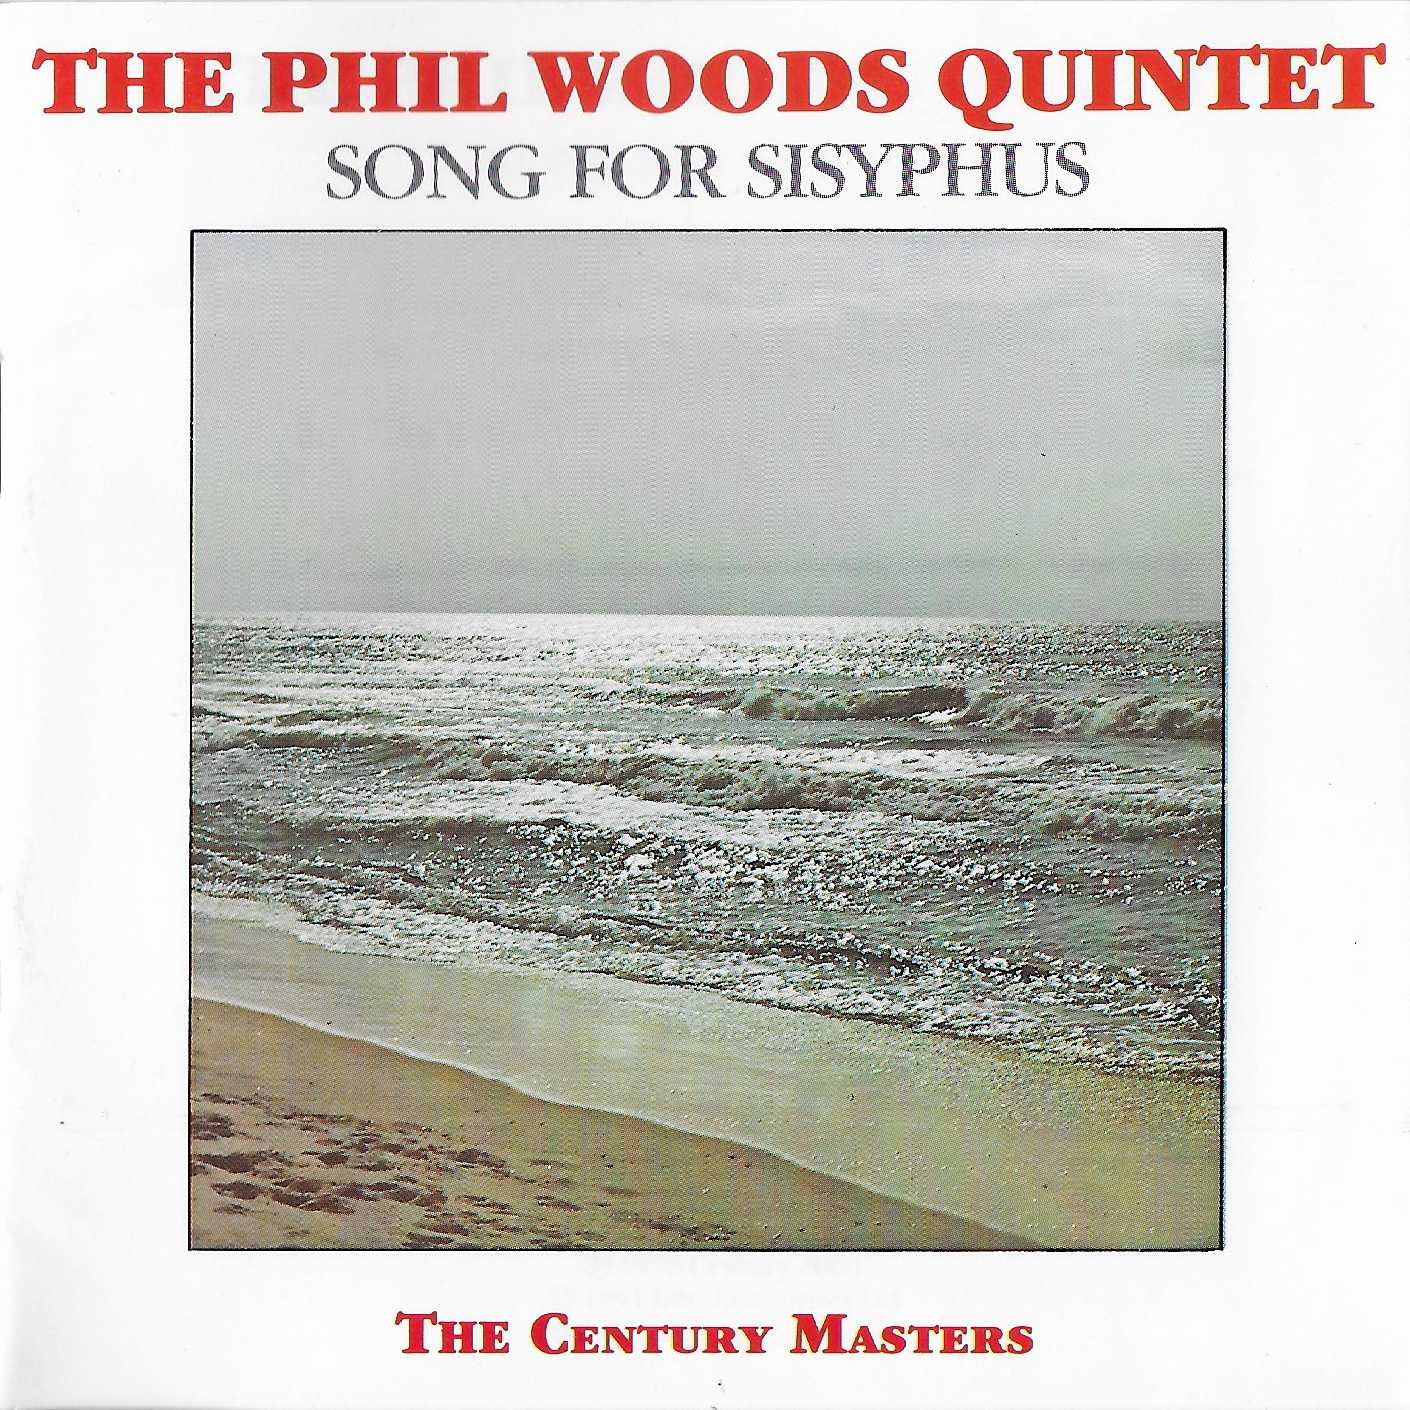 Picture of The Century Catalogue - Song for Sisyphus by artist The Phil Woods Quintet from the BBC cds - Records and Tapes library